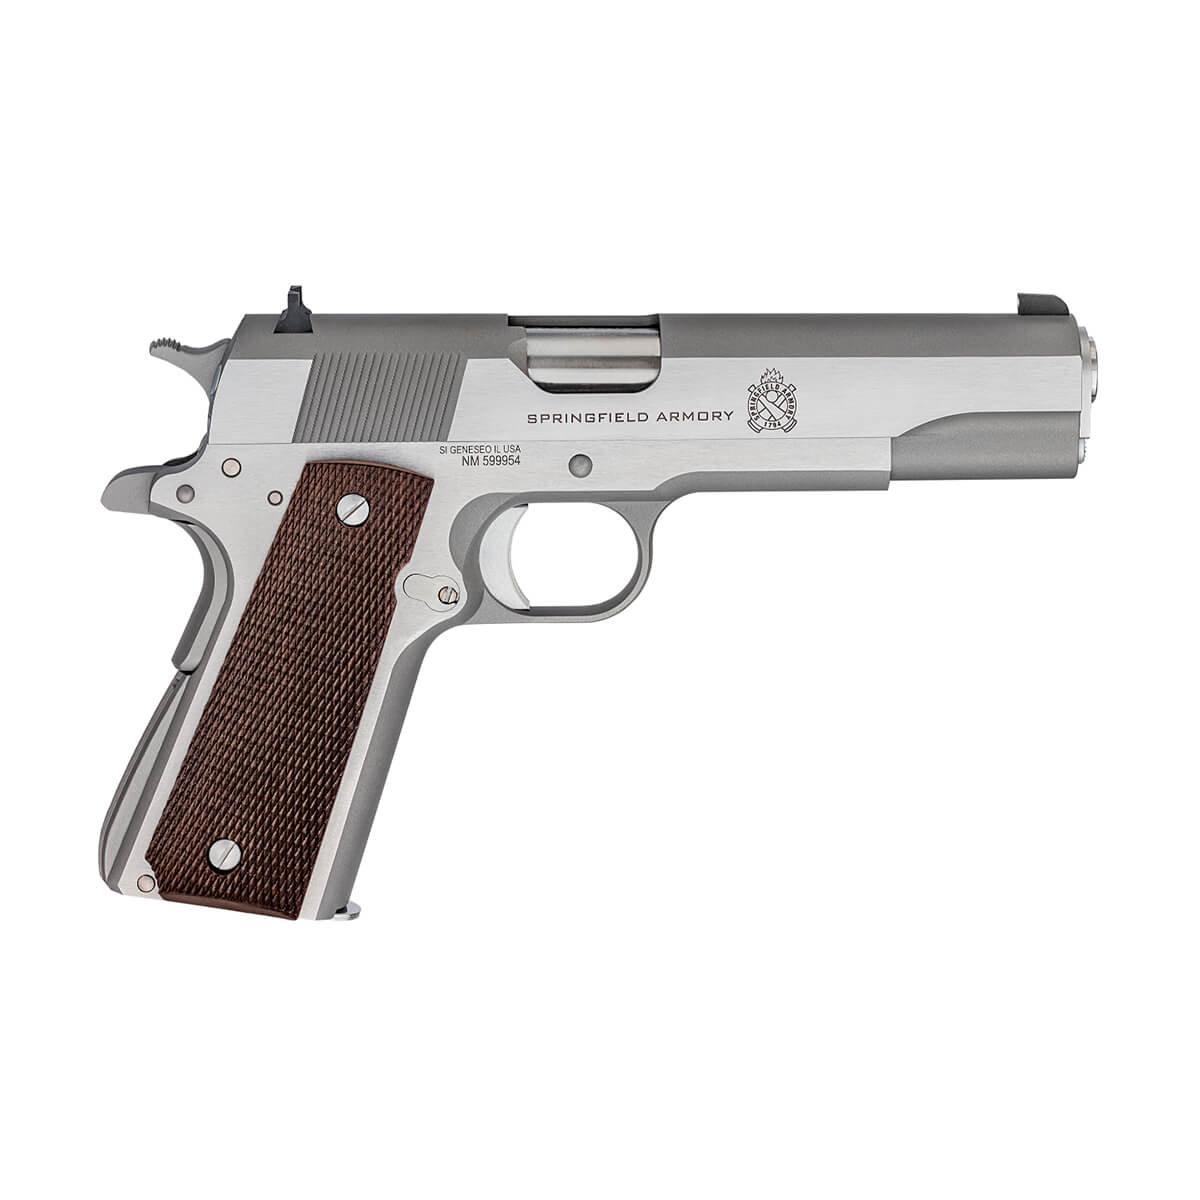 DEFEND YOUR LEGACY SERIES 1911 MIL-SPEC .45 ACP HANDGUN – STAINLESS - 1